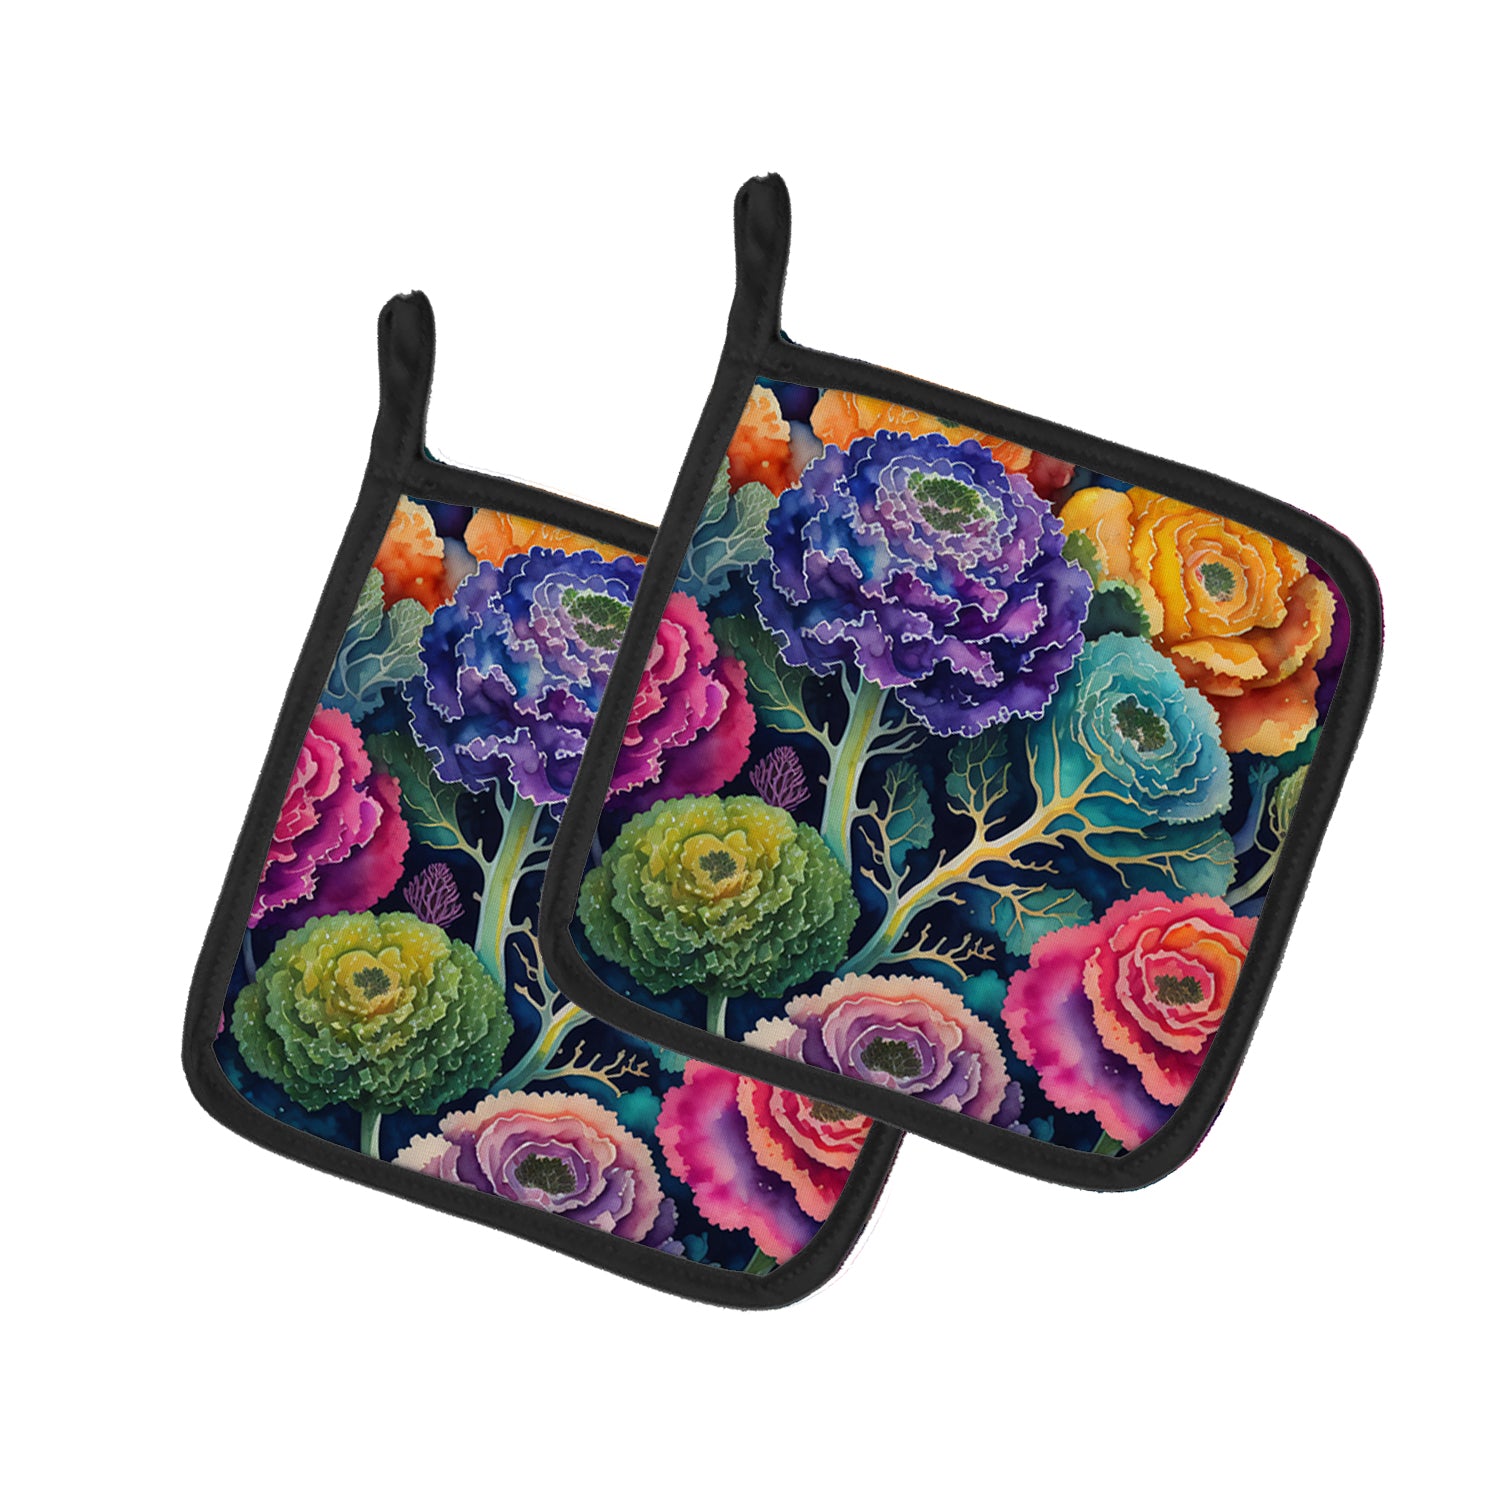 Buy this Colorful Ornamental Kale Pair of Pot Holders